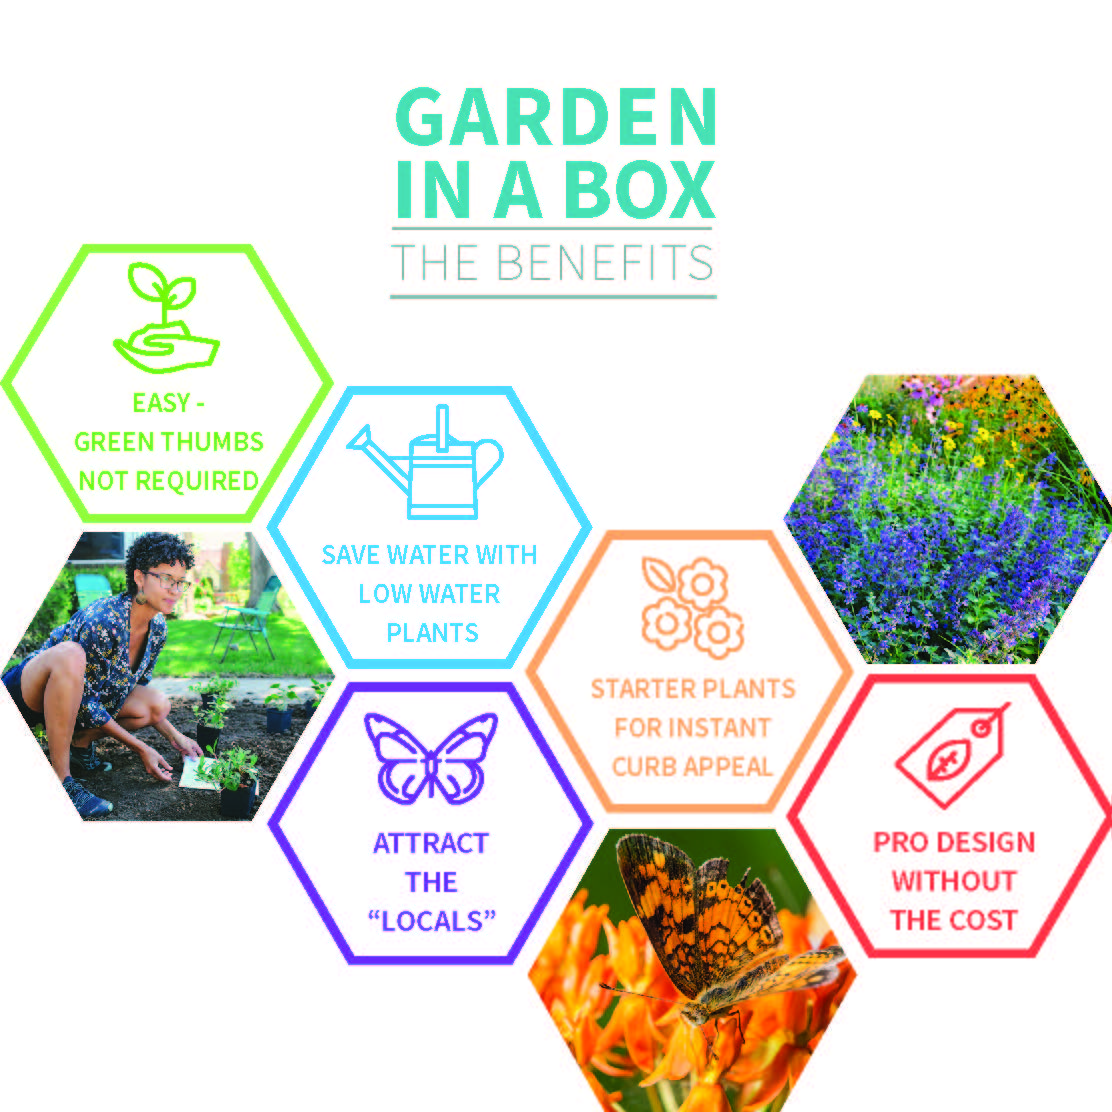 Graphic of the benefits of Garden in a box